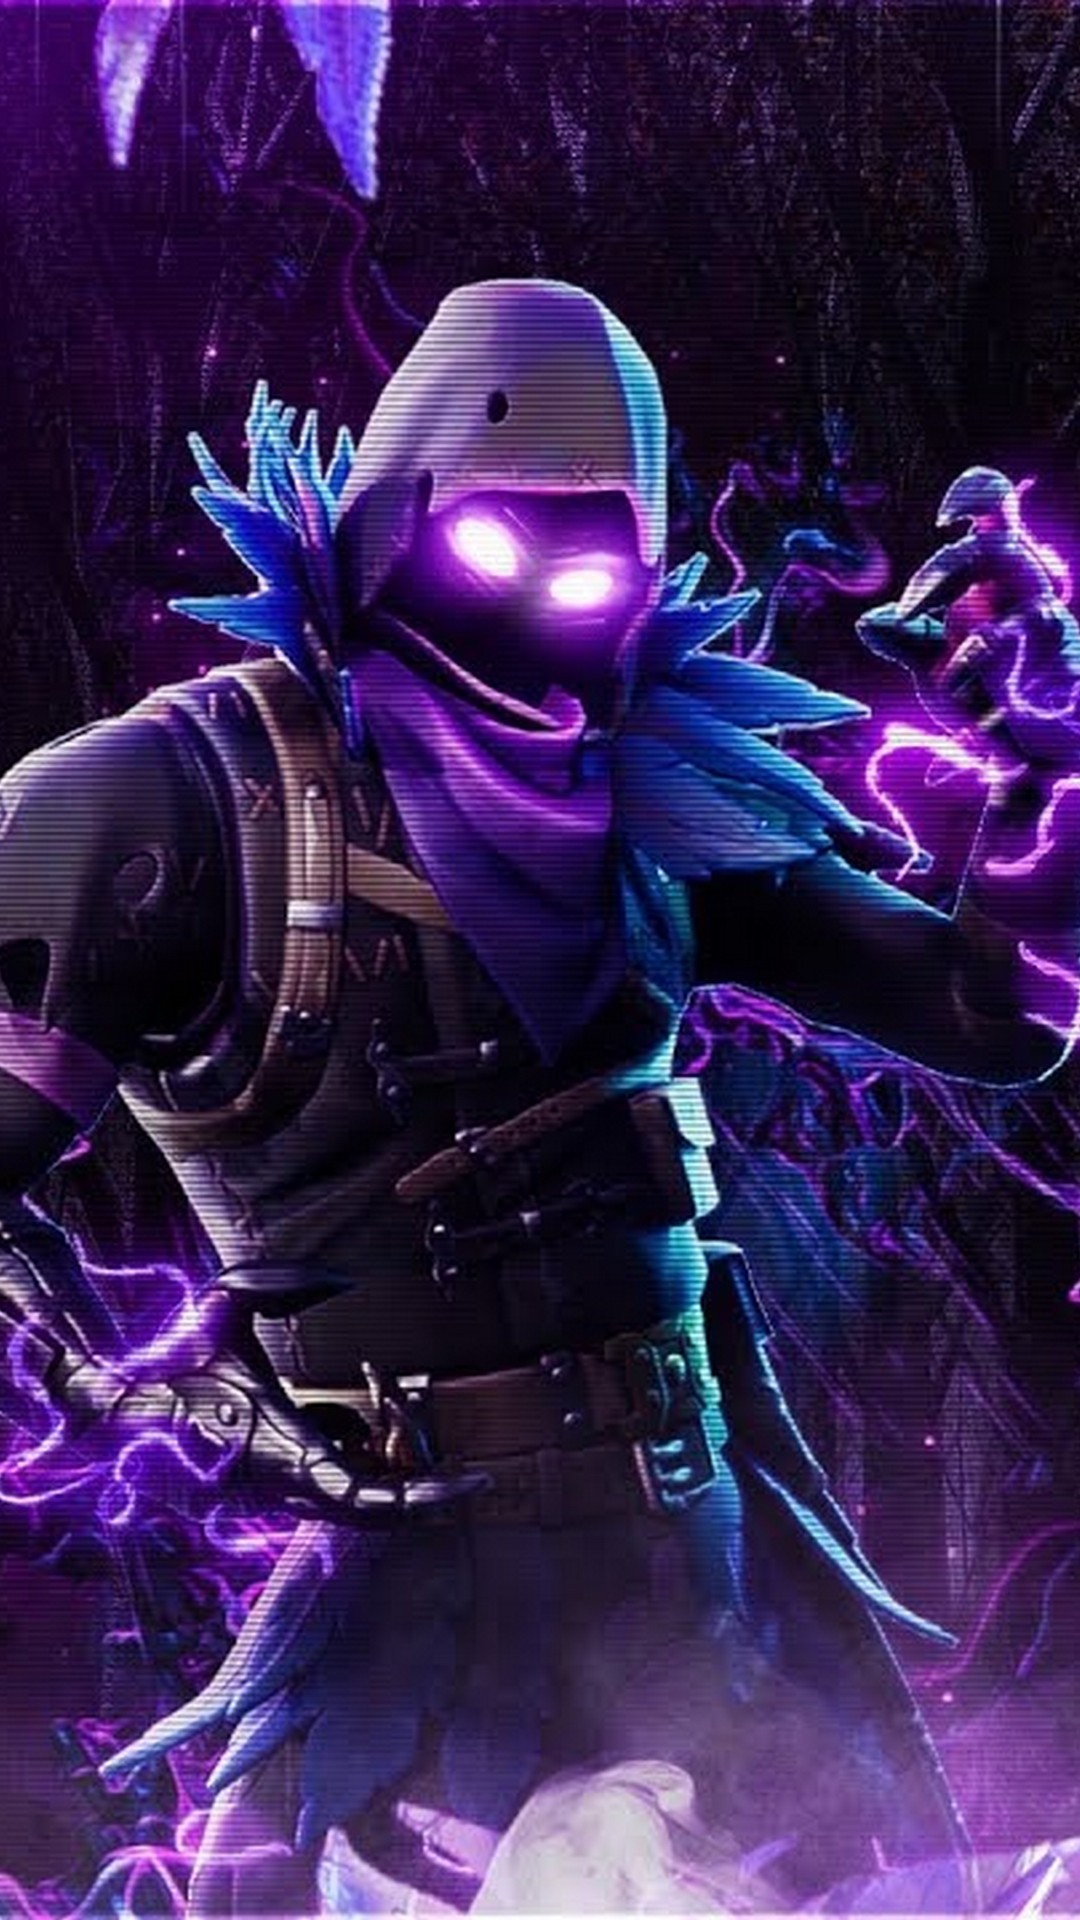 Fortnite iPhone 6 Wallpaper HD with high-resolution 1080x1920 pixel. Download all Mobile Wallpapers and Use them as wallpapers for your iPhone, Tablet, iPad, Android and other mobile devices